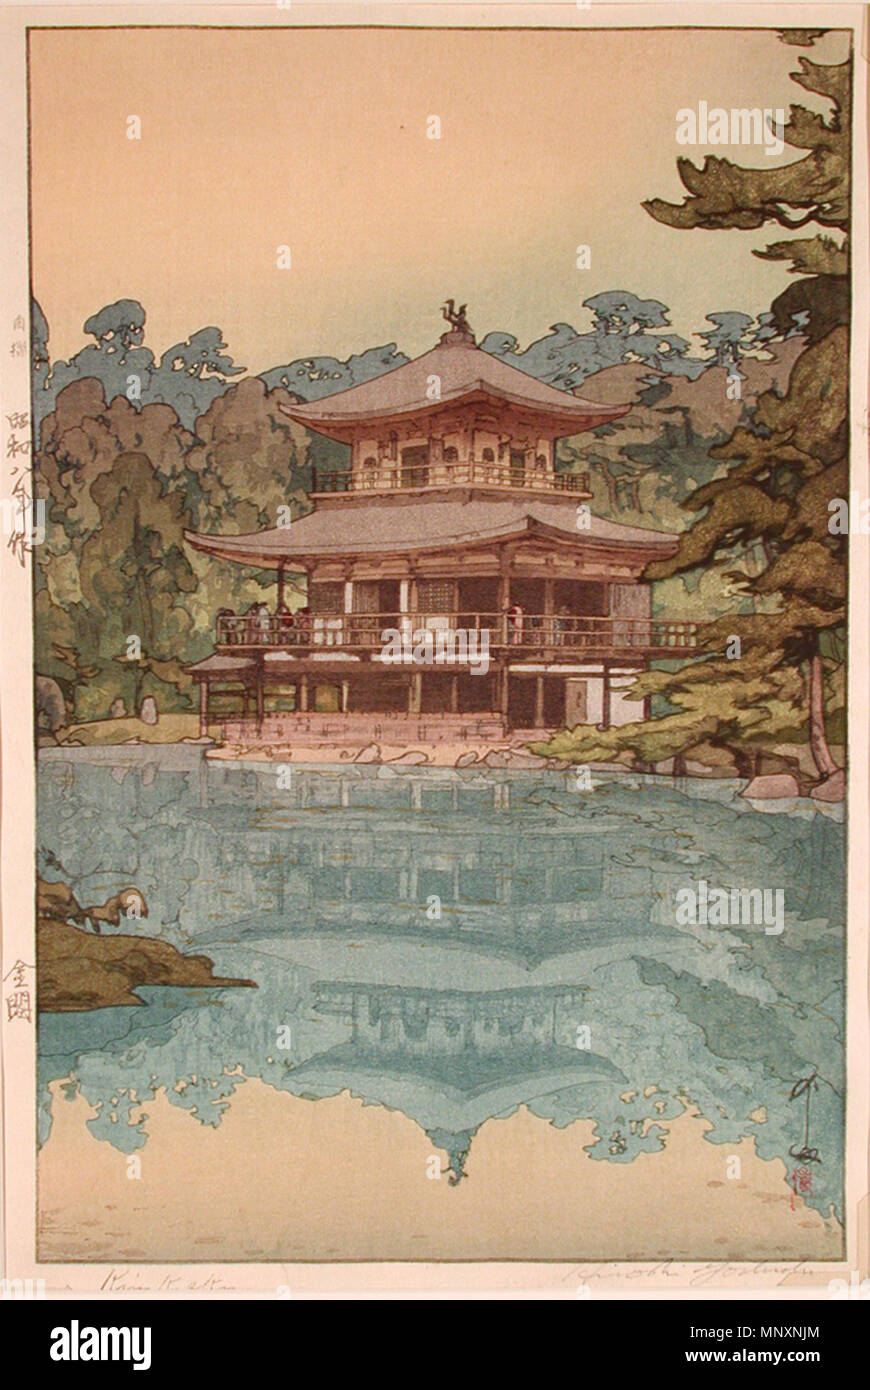 .  English: Accession Number: 1998.101 Display Artist: Yoshida Hiroshi Display Title: The Golden Pavilion Series Title: Kansai District Creation Date: 1933 Height: 14 13/16 in. Width: 9 5/8 in. Display Dimensions: 14 13/16 in. x 9 5/8 in. (37.62 cm x 24.45 cm) Credit Line: Gift of Mr. and Mrs. Robert E. Paige Label Copy: 'In the early Tokaido series created before Hiroshiges popular works of the 1830s to 1850s, stations of the Tokaido were depicted not as landscape scenes, but with an emphasis on figures, stories, or products associated with each region. In this print Hokusai depicts an interi Stock Photo